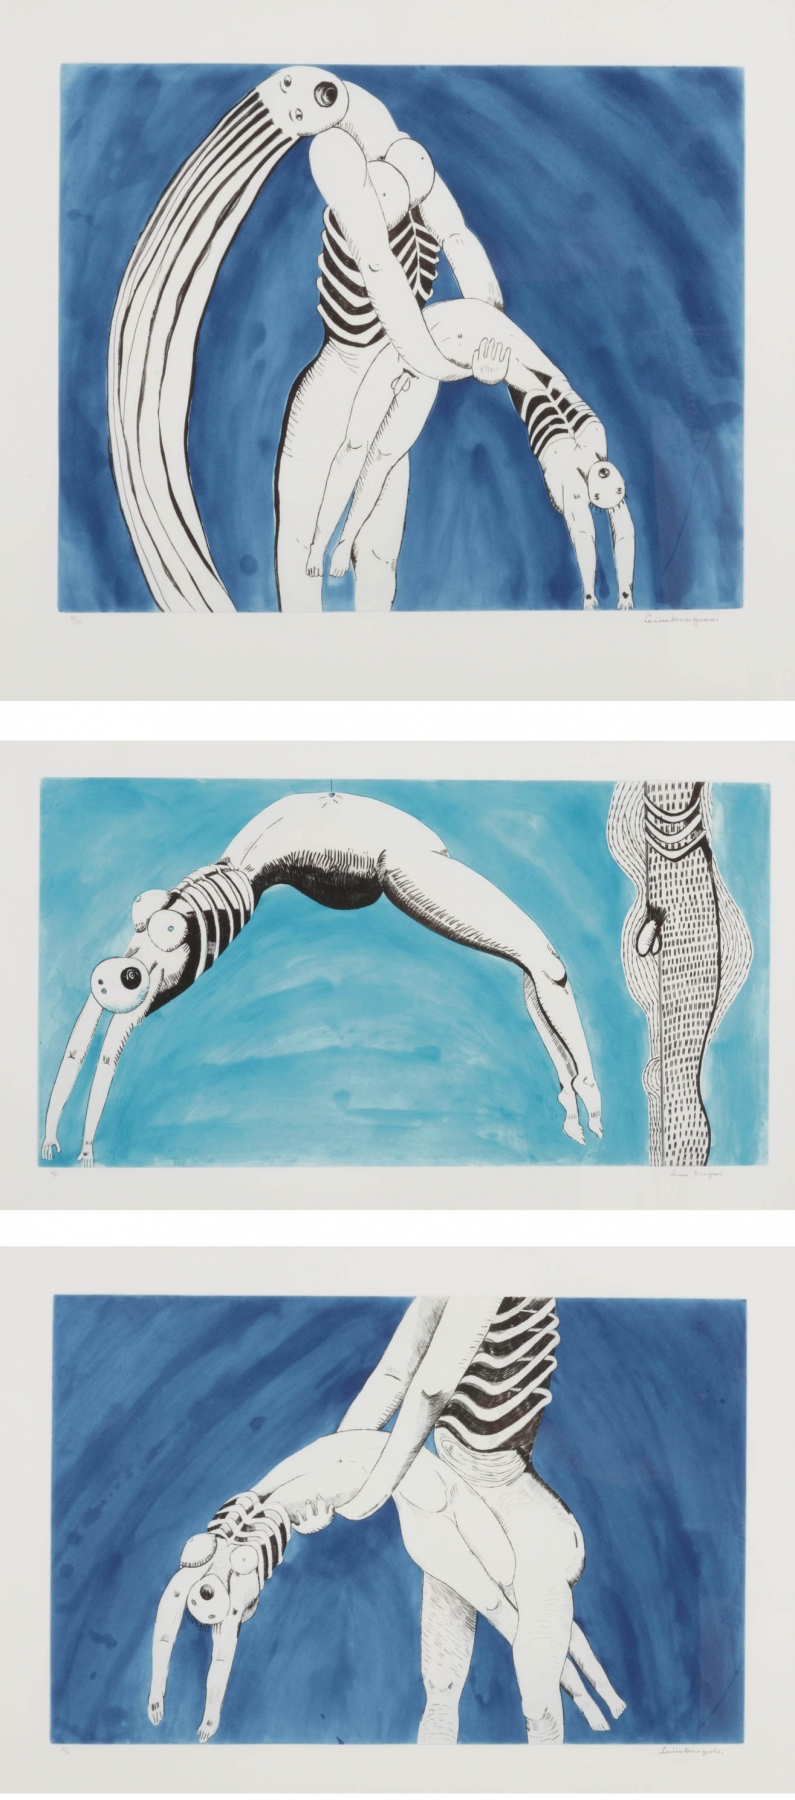 Louise Bourgeois
Triptych for the Red Room, 1994
3 aquatints, drypoints, and engravings
Sheet sizes vary
Edition of 30 + proofs

Inquire